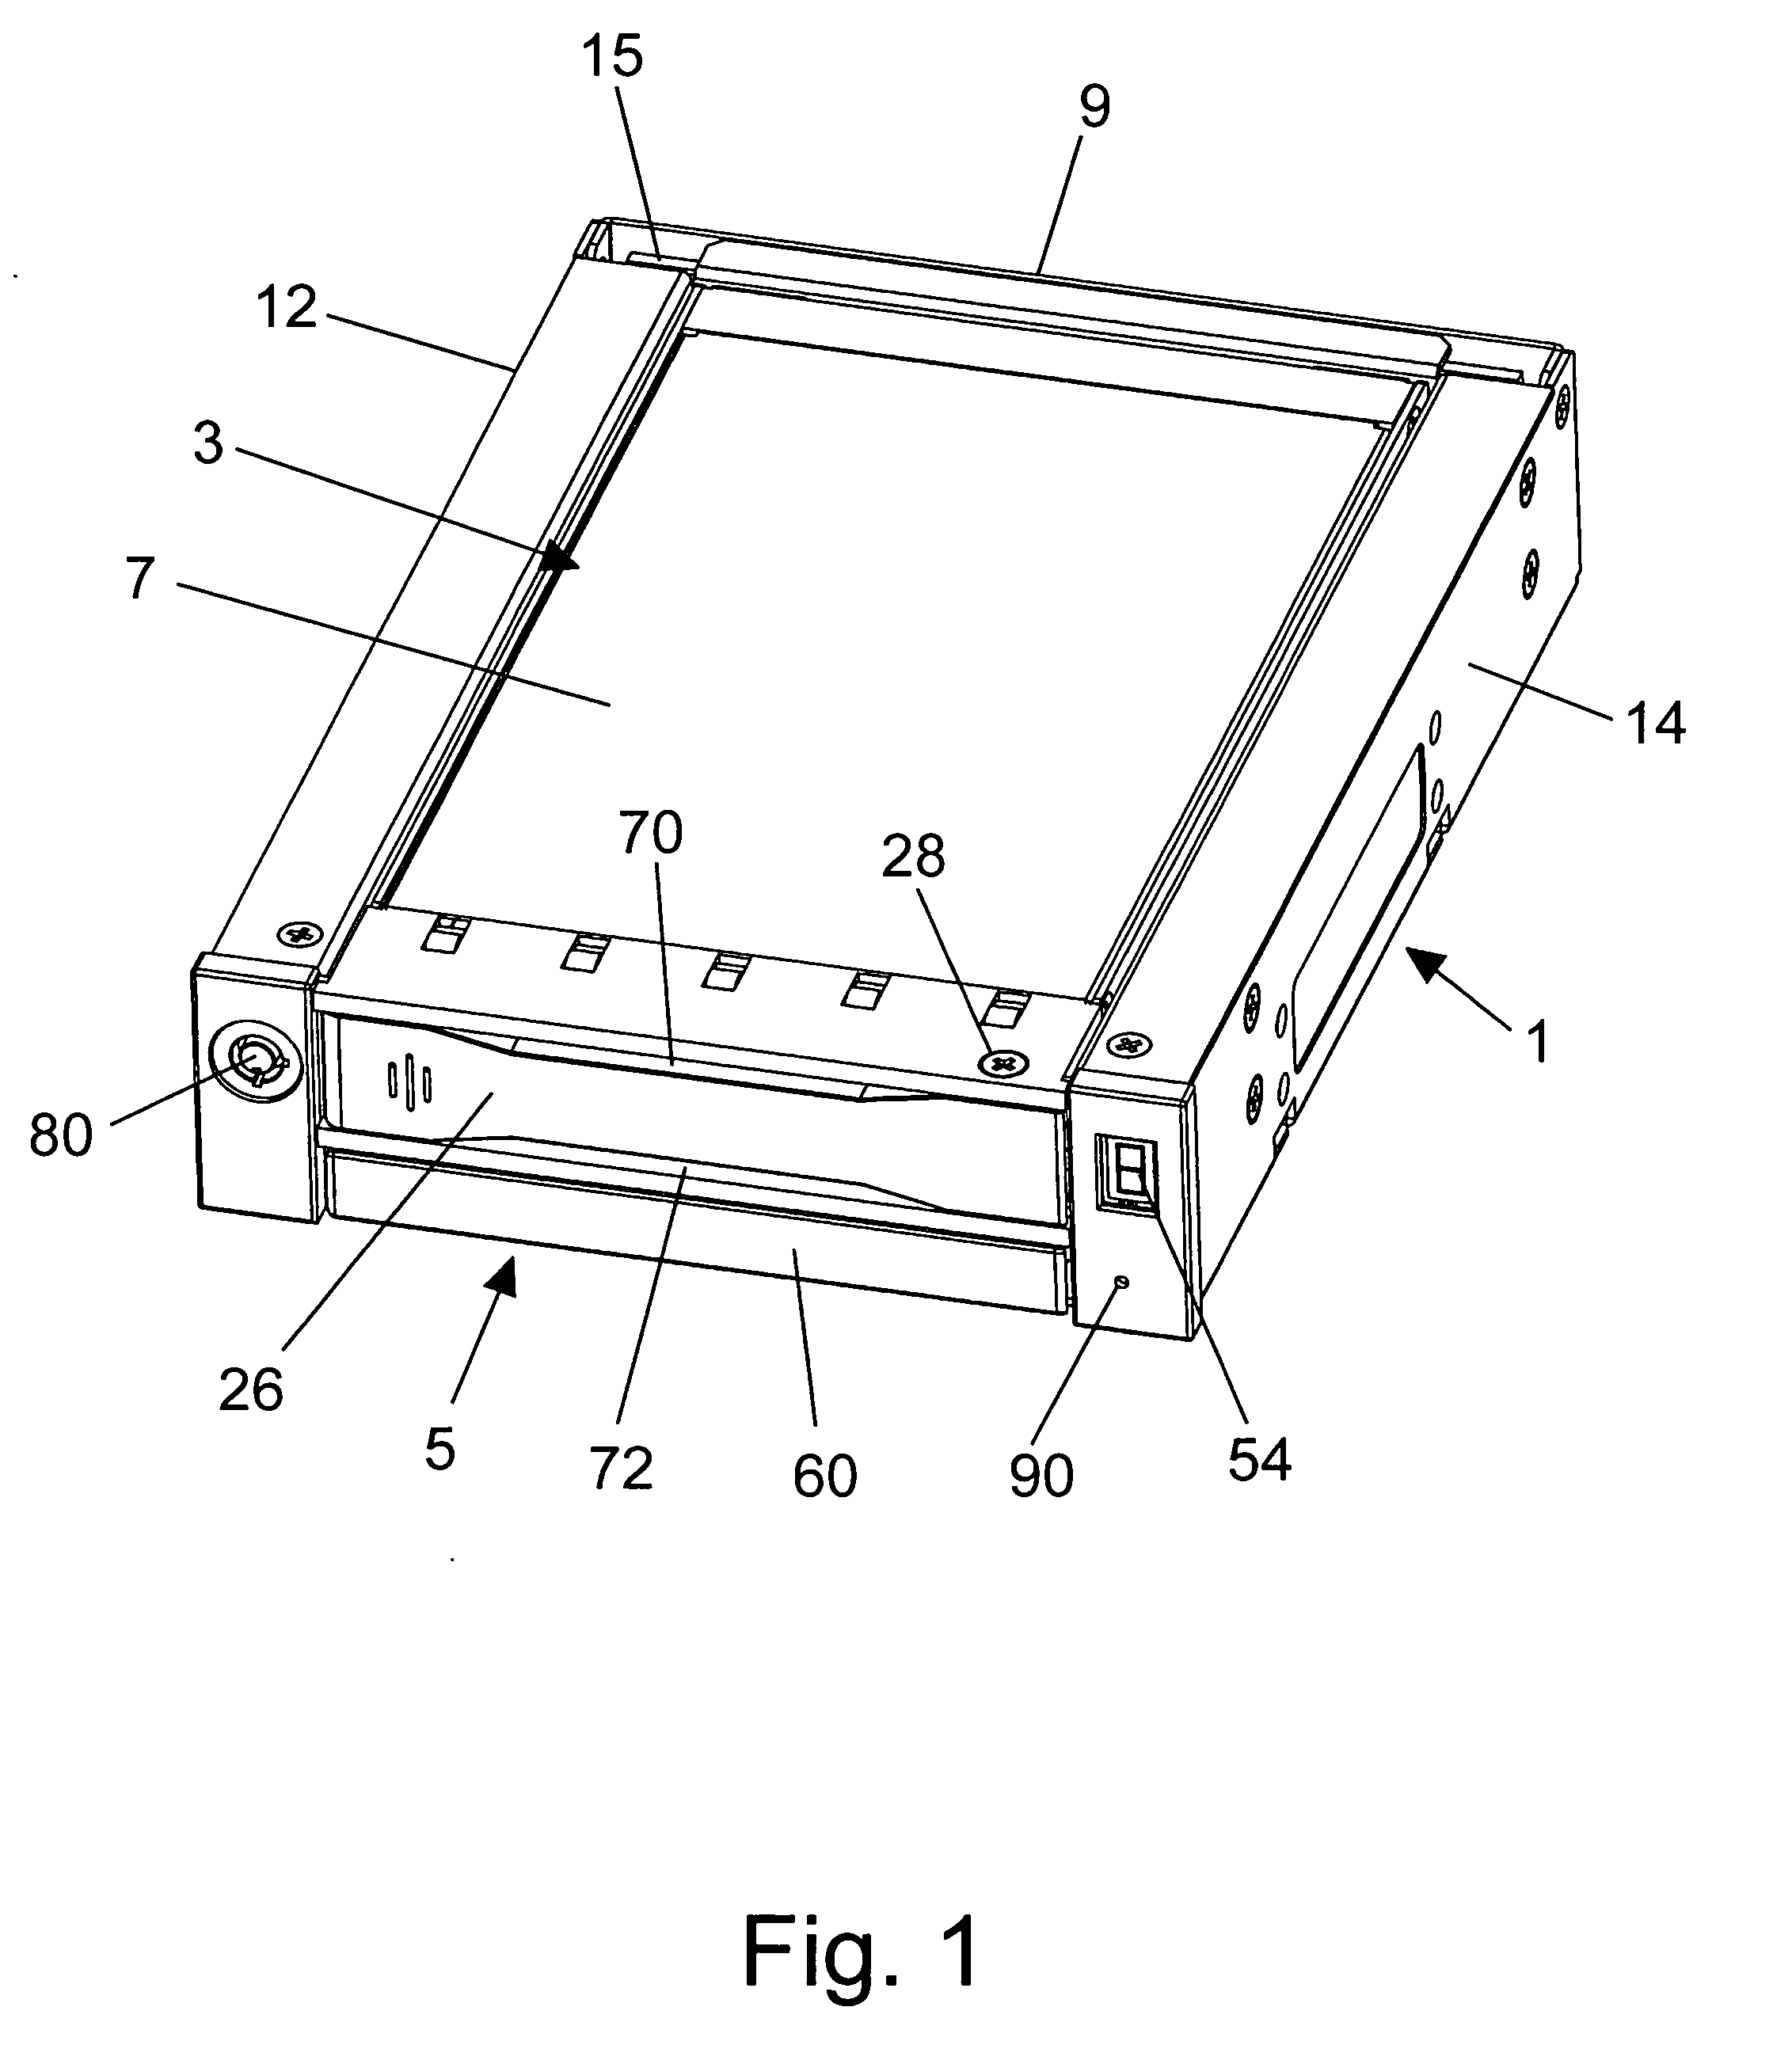 Receiving frame having removable computer drive carrier and fan modules